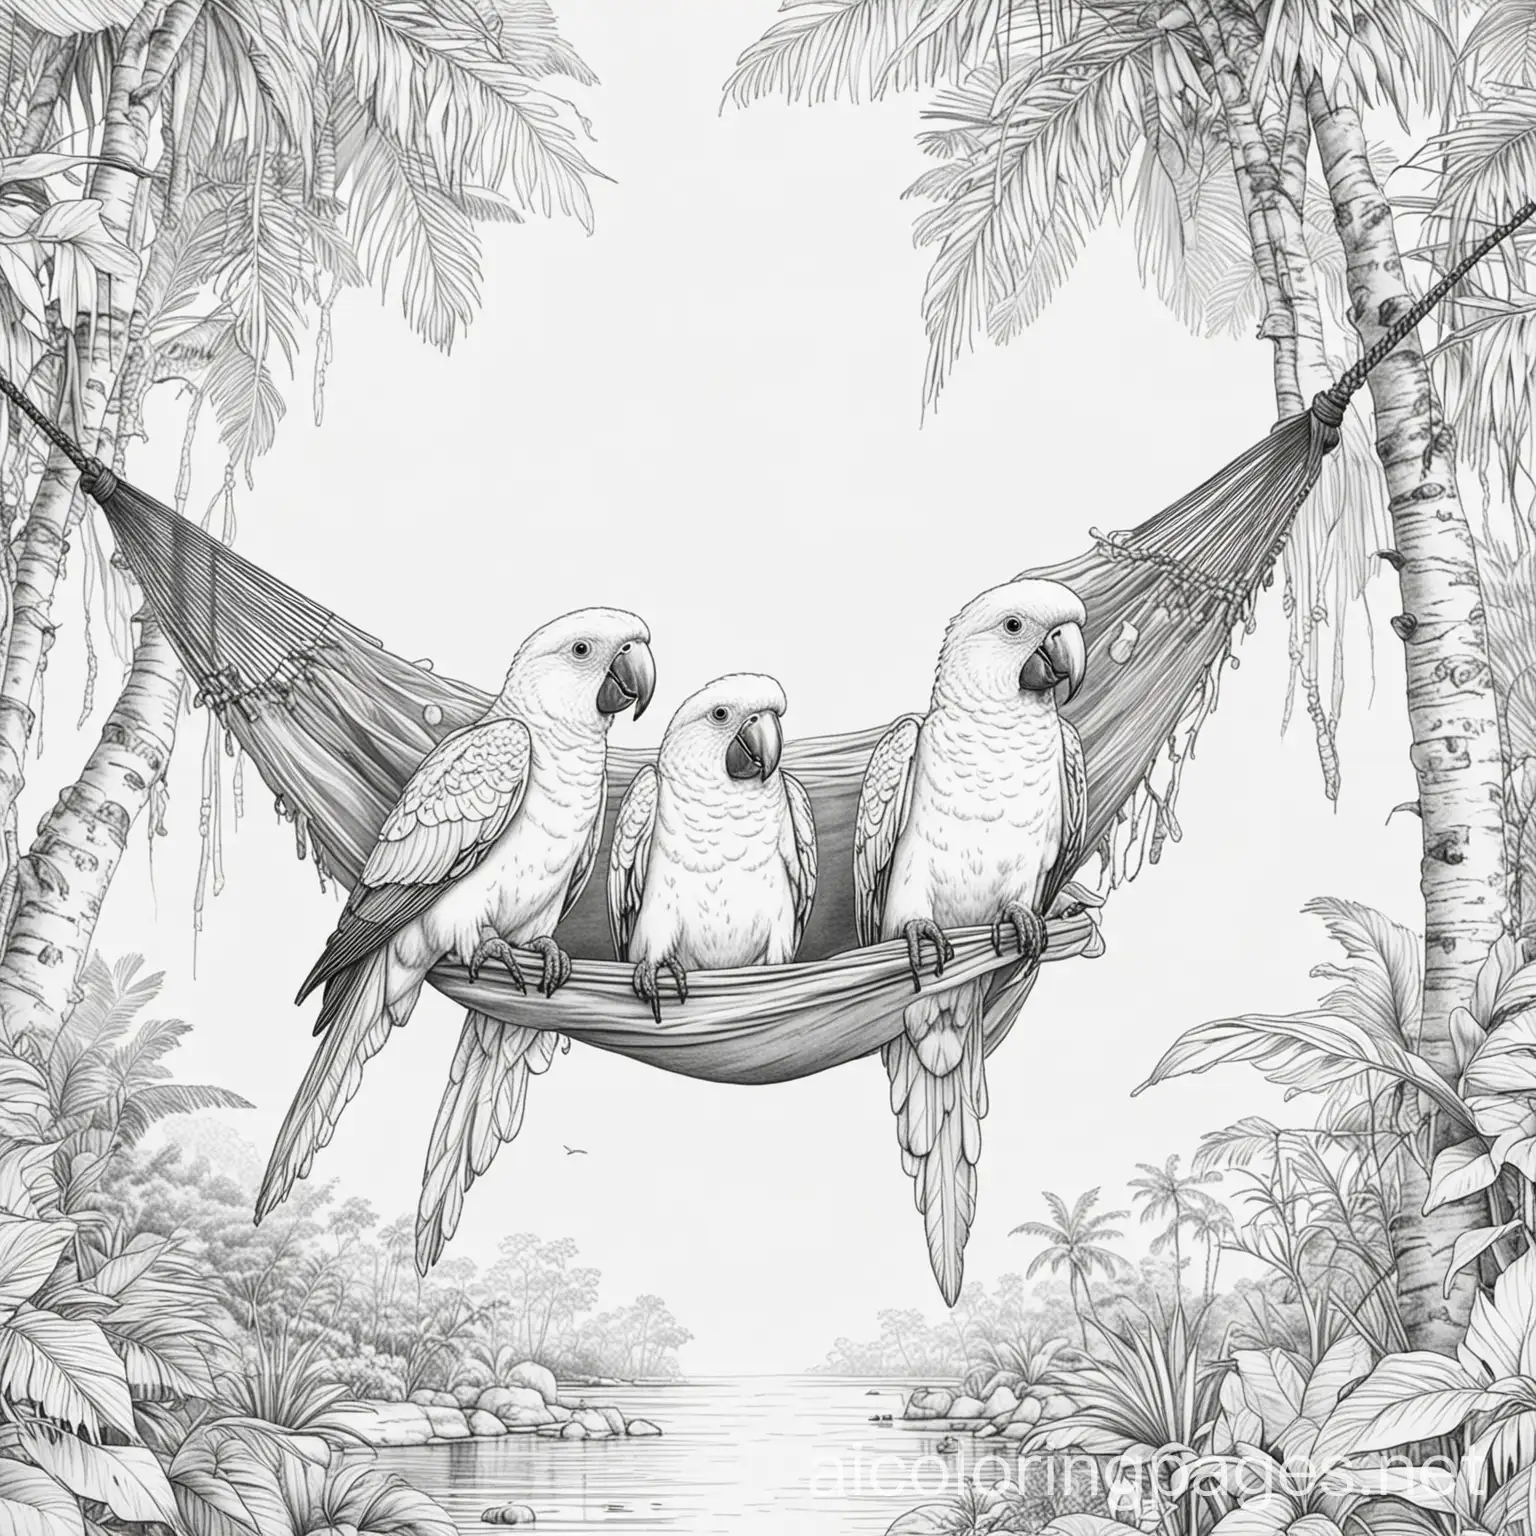 parrots at a hammock, Coloring Page, black and white, line art, white background, Simplicity, Ample White Space. The background of the coloring page is plain white to make it easy for young children to color within the lines. The outlines of all the subjects are easy to distinguish, making it simple for kids to color without too much difficulty